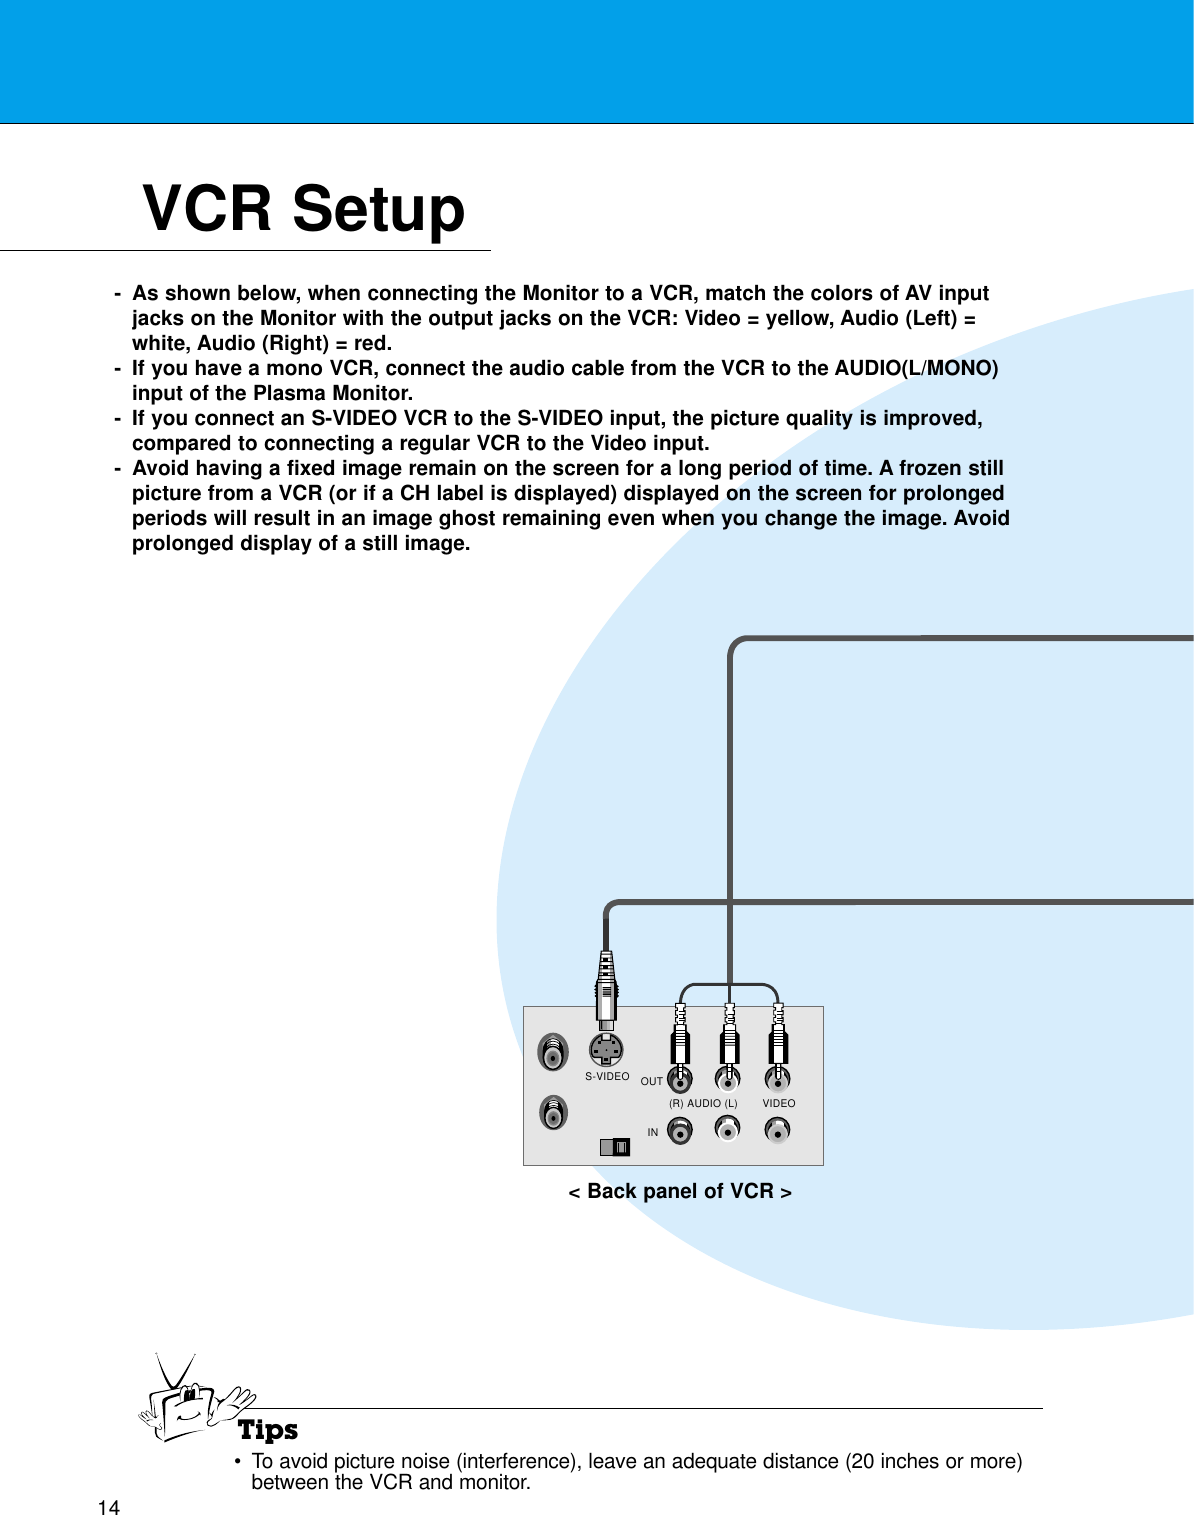 14VCR SetupTips•To avoid picture noise (interference), leave an adequate distance (20 inches or more)between the VCR and monitor.S-VIDEO OUTIN(R) AUDIO (L) VIDEO&lt; Back panel of VCR &gt;- As shown below, when connecting the Monitor to a VCR, match the colors of AV inputjacks on the Monitor with the output jacks on the VCR: Video = yellow, Audio (Left) =white, Audio (Right) = red.- If you have a mono VCR, connect the audio cable from the VCR to the AUDIO(L/MONO)input of the Plasma Monitor. - If you connect an S-VIDEO VCR to the S-VIDEO input, the picture quality is improved,compared to connecting a regular VCR to the Video input. - Avoid having a fixed image remain on the screen for a long period of time. A frozen stillpicture from a VCR (or if a CH label is displayed) displayed on the screen for prolongedperiods will result in an image ghost remaining even when you change the image. Avoidprolonged display of a still image.